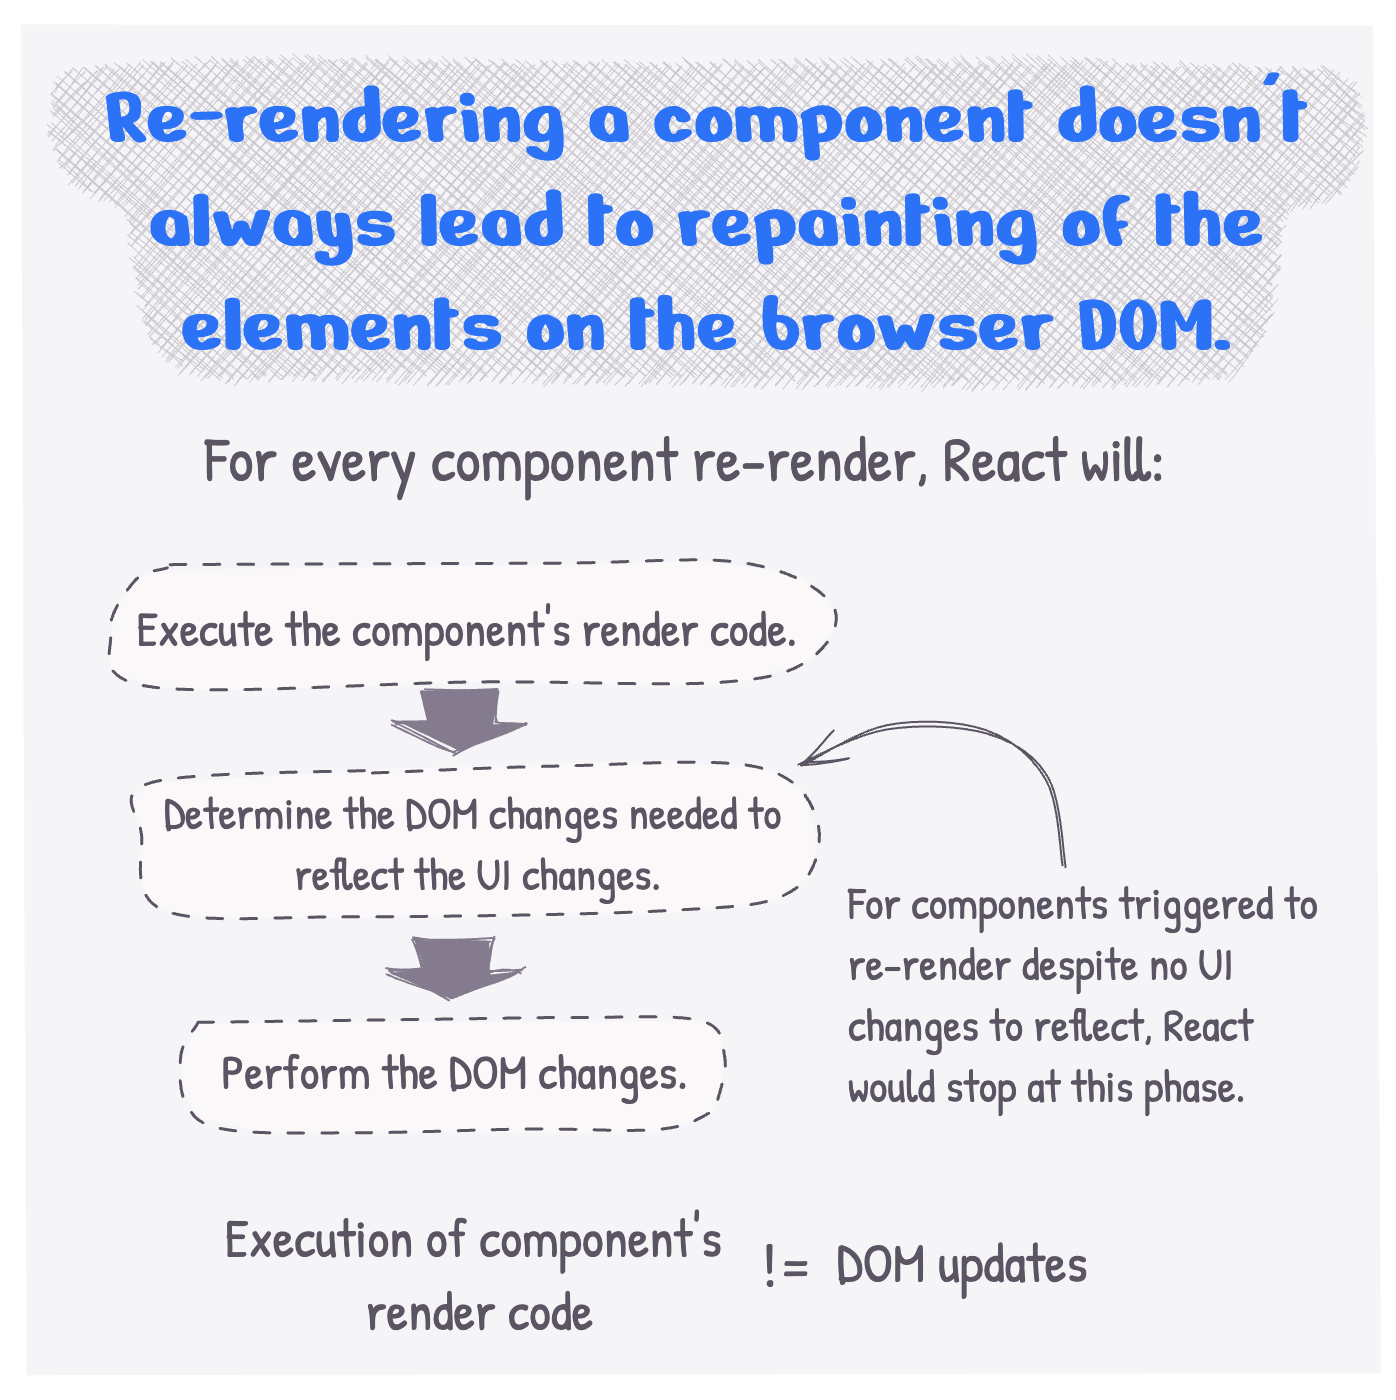 Re-rendering a component doesn't always lead to repainting of elements on the browser DOM. For every component re-render, React determines the DOM changes needed to reflect the UI change. For components triggered to re-render despite no UI changes, React will not perform the DOM changes.